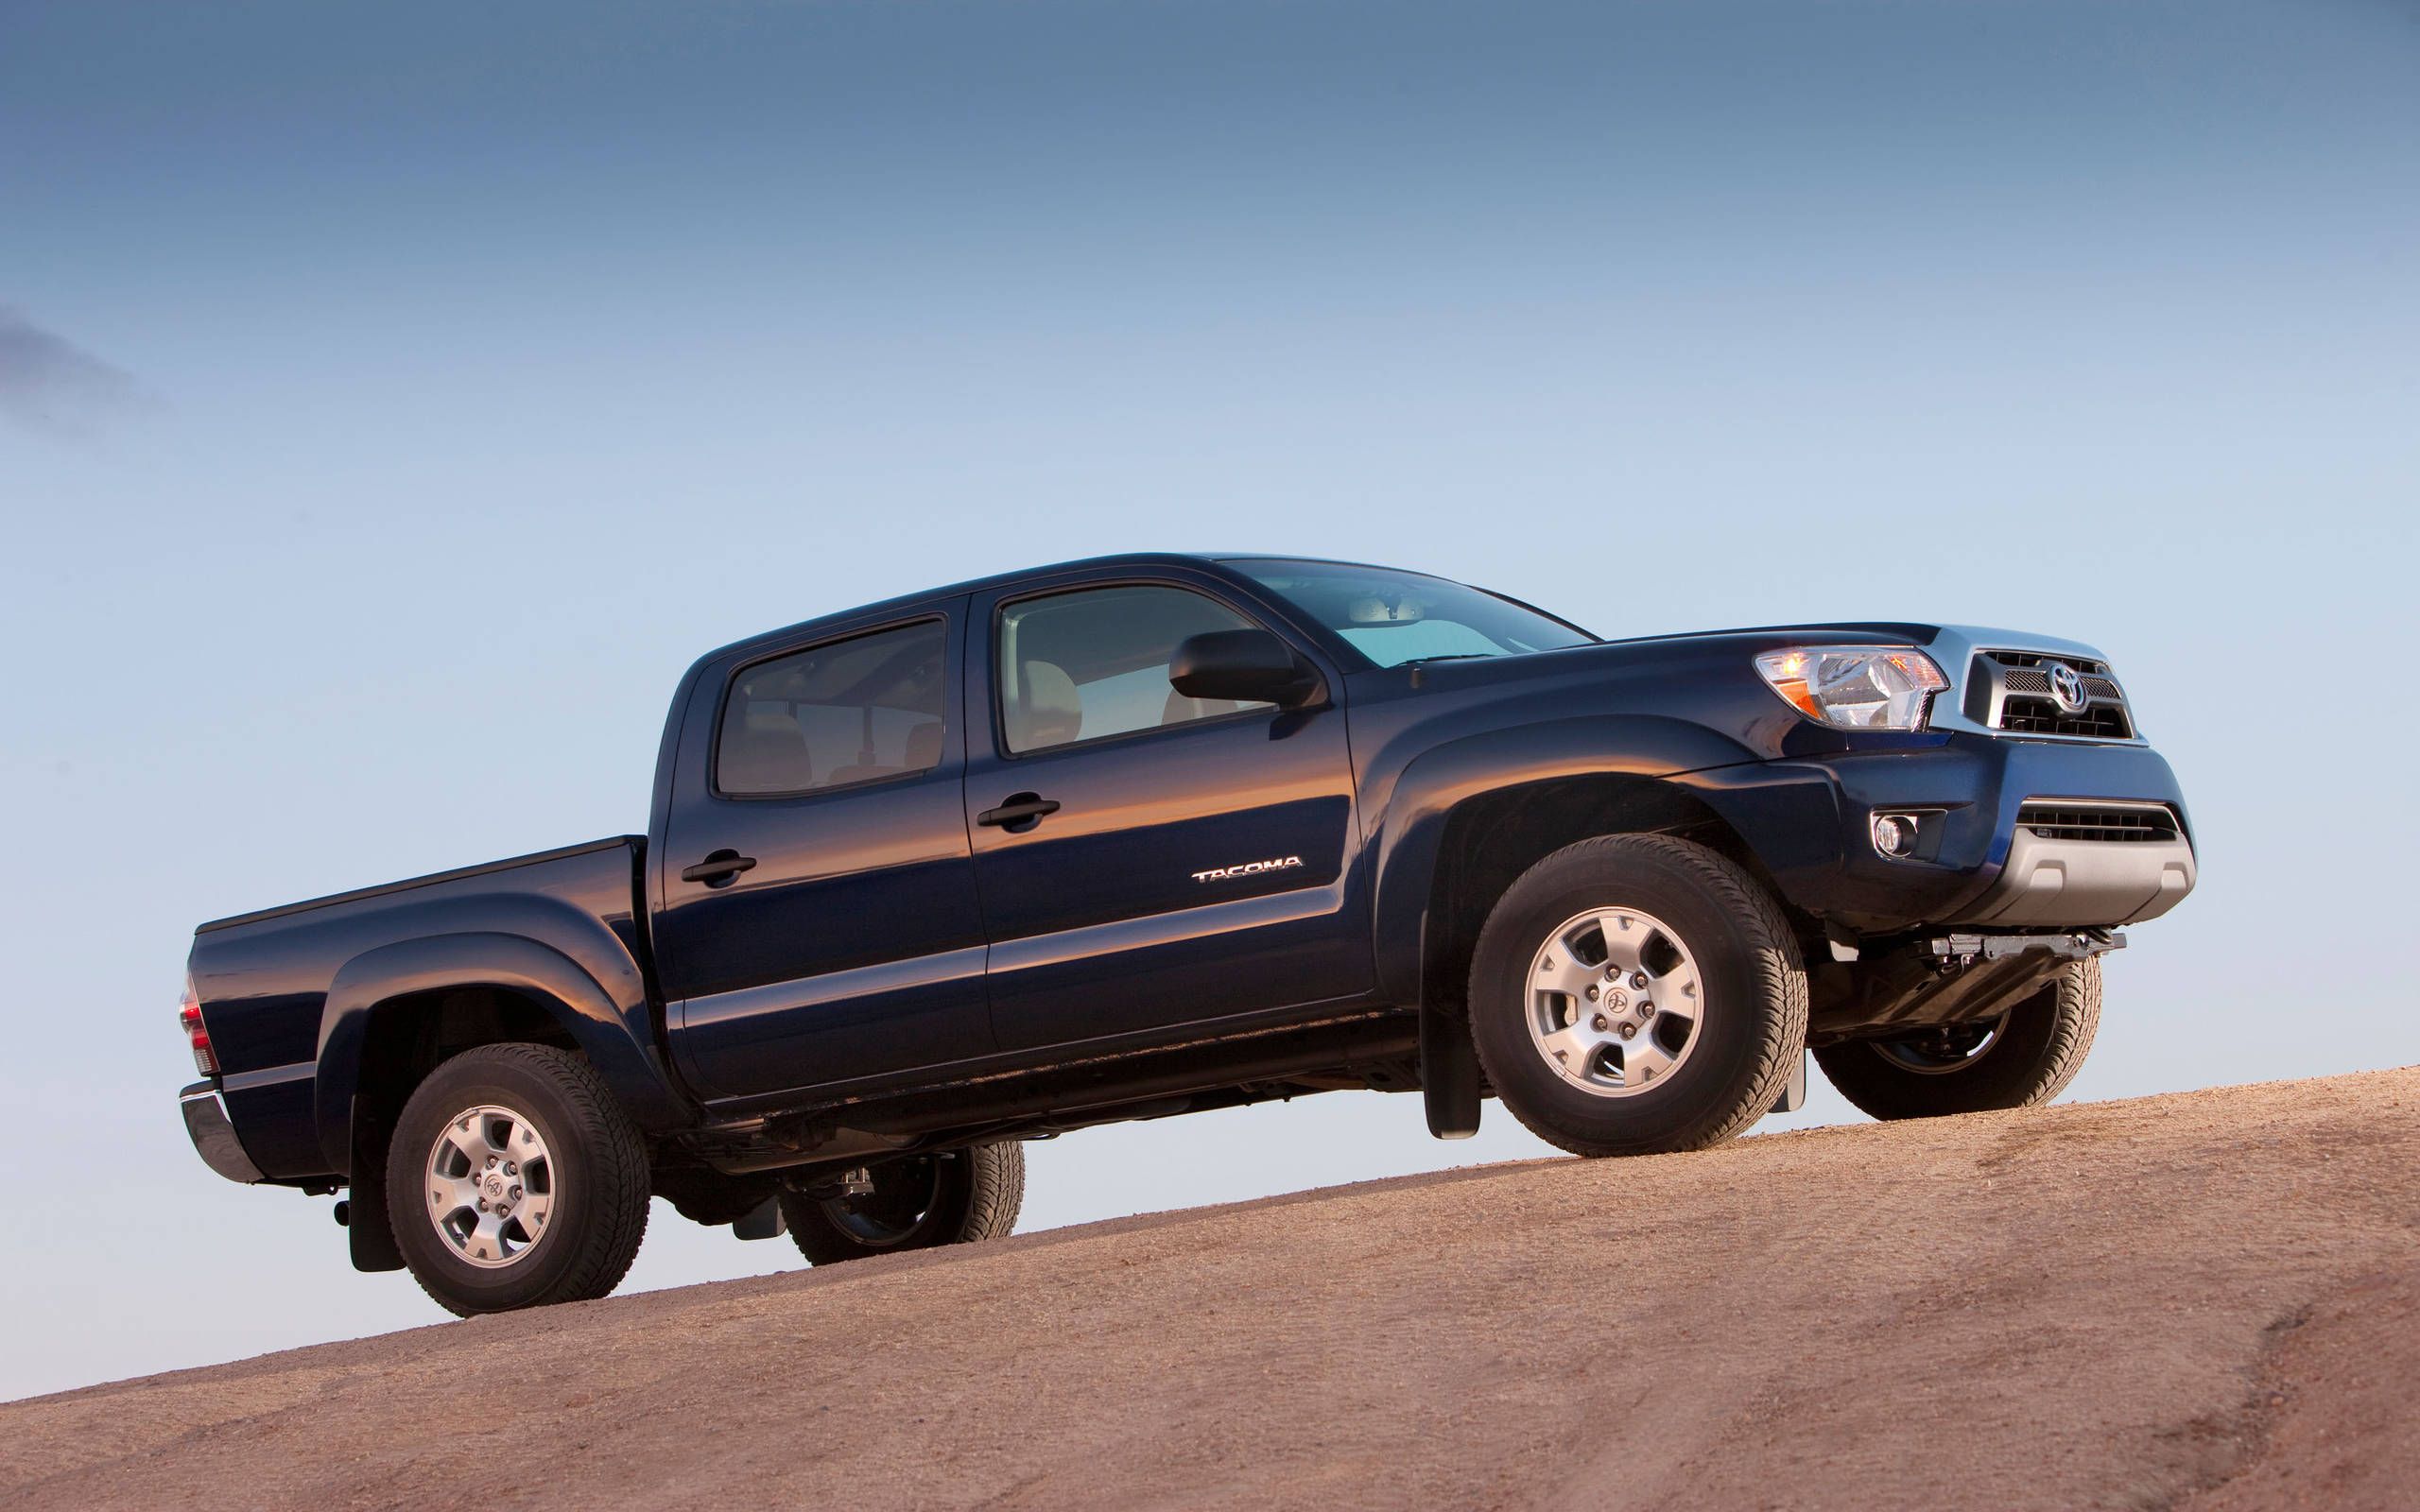 2014 Toyota Tacoma Double Cab review notes